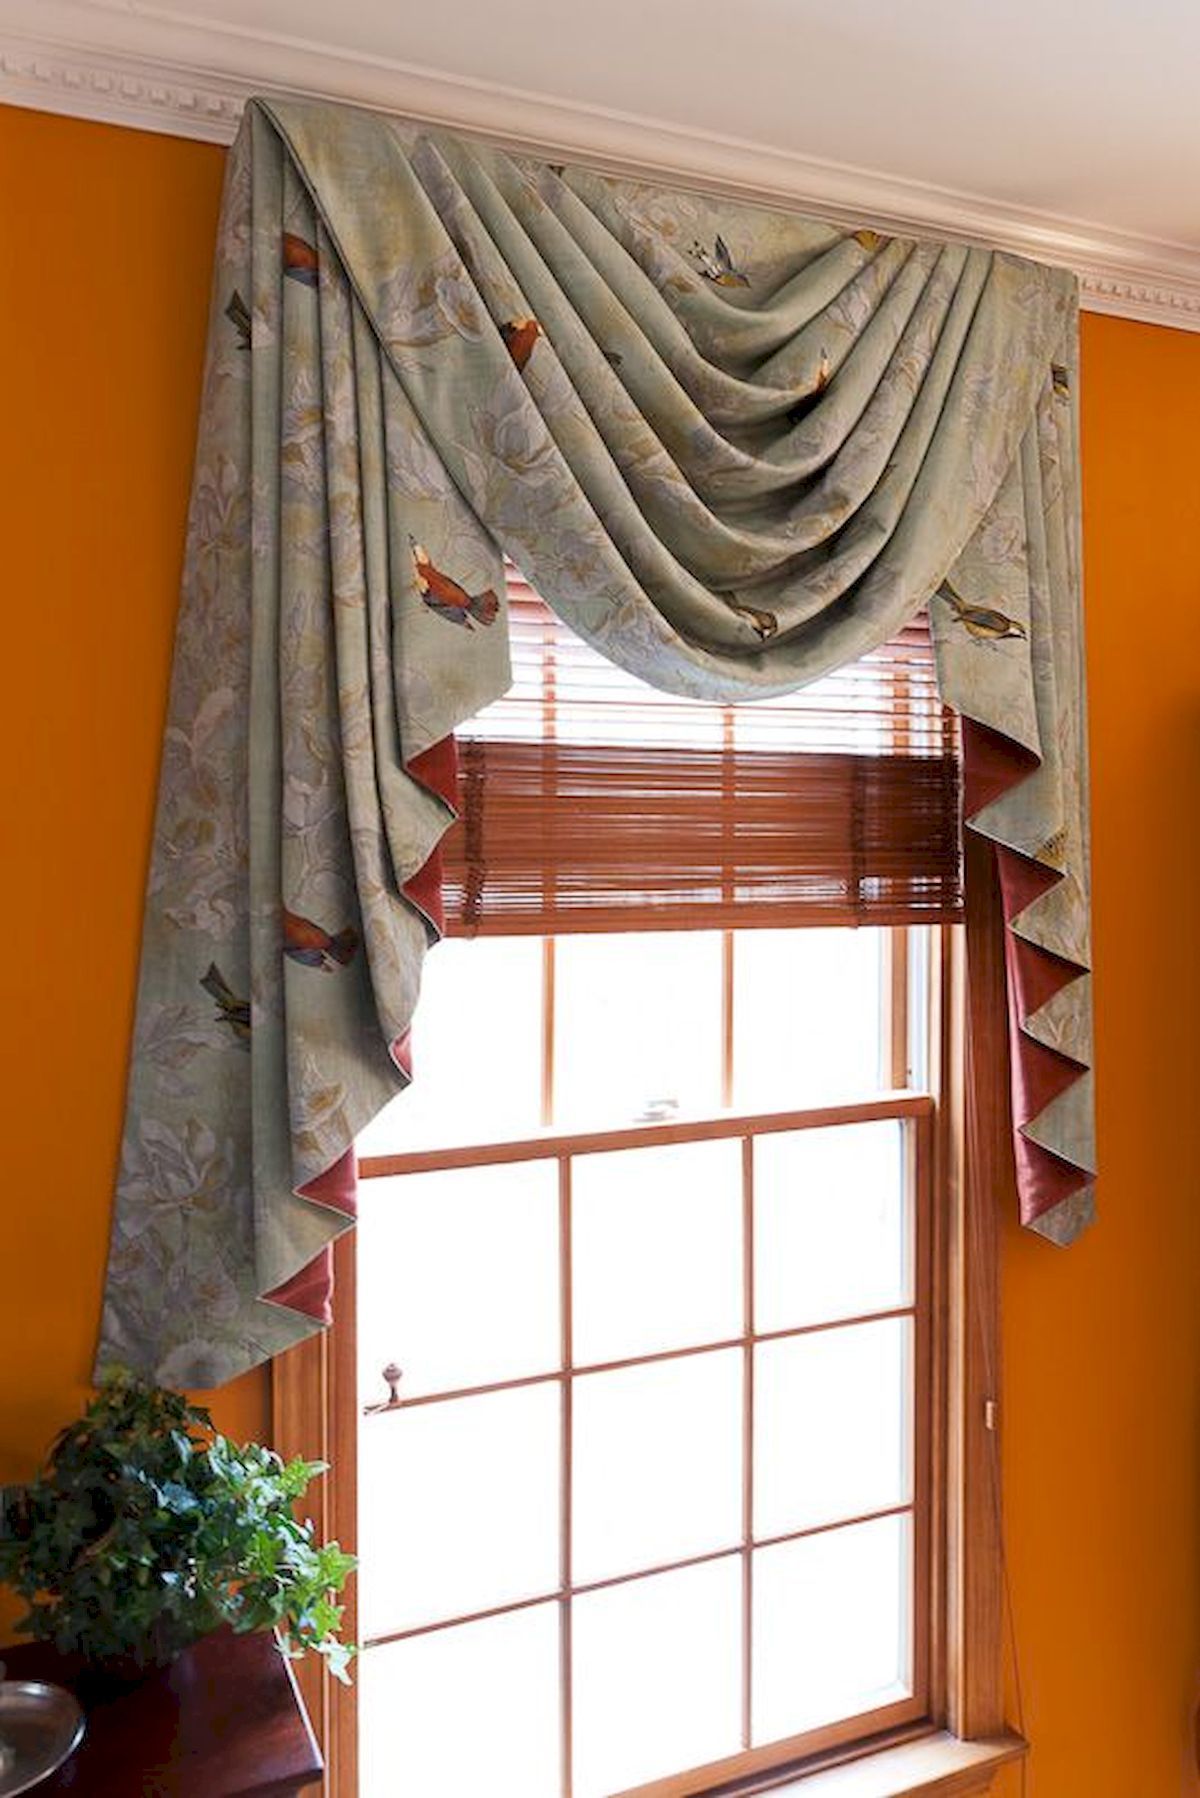 The Ultimate Guide To Choosing The Right Curtains For Your Home